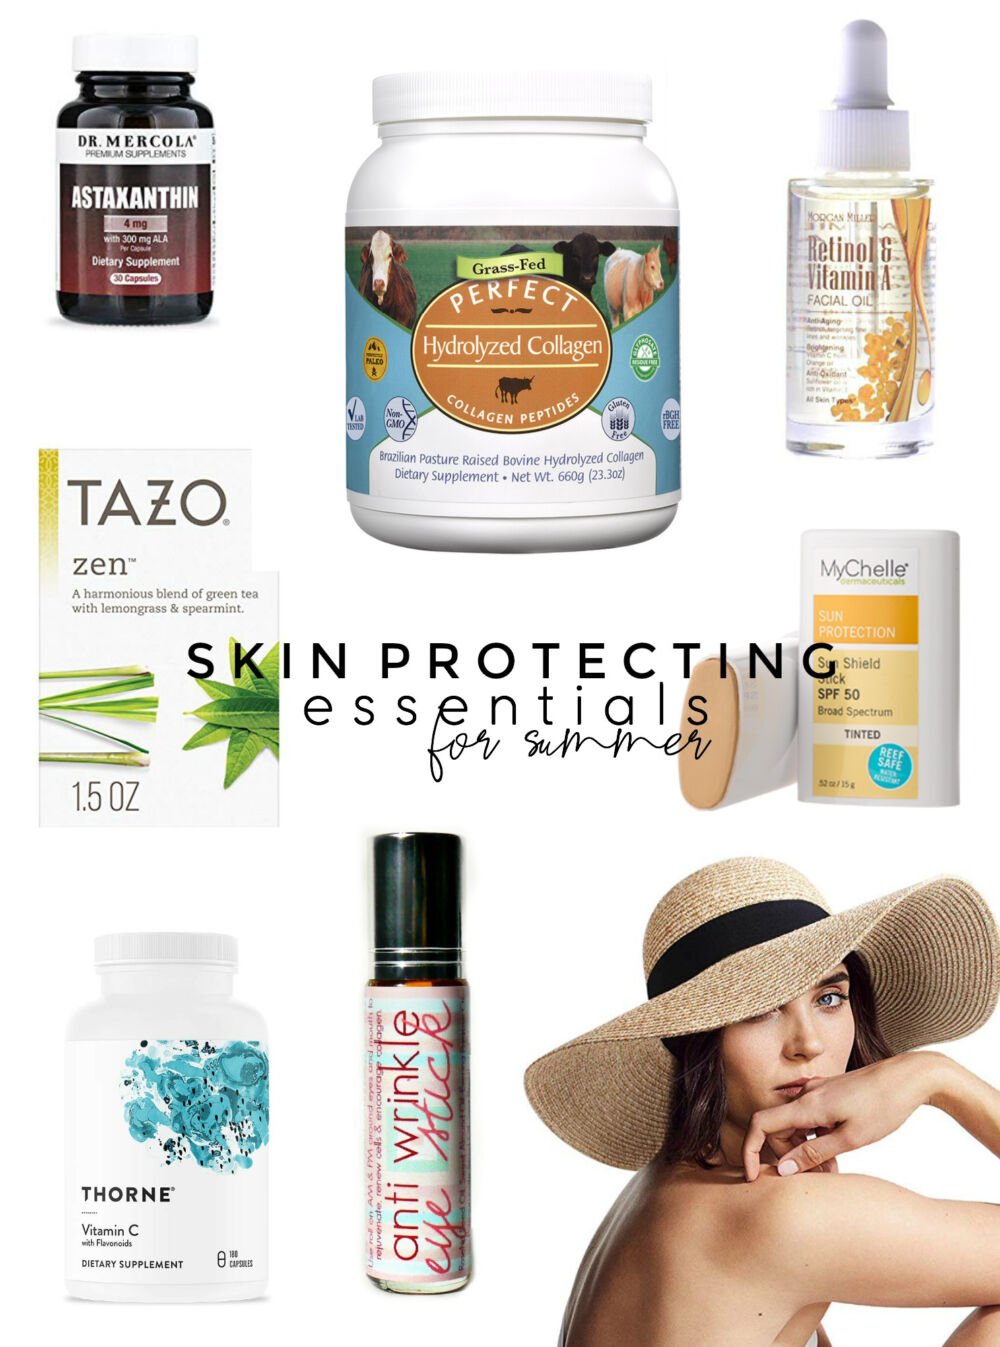 Skin Protecting Essentials for Summer